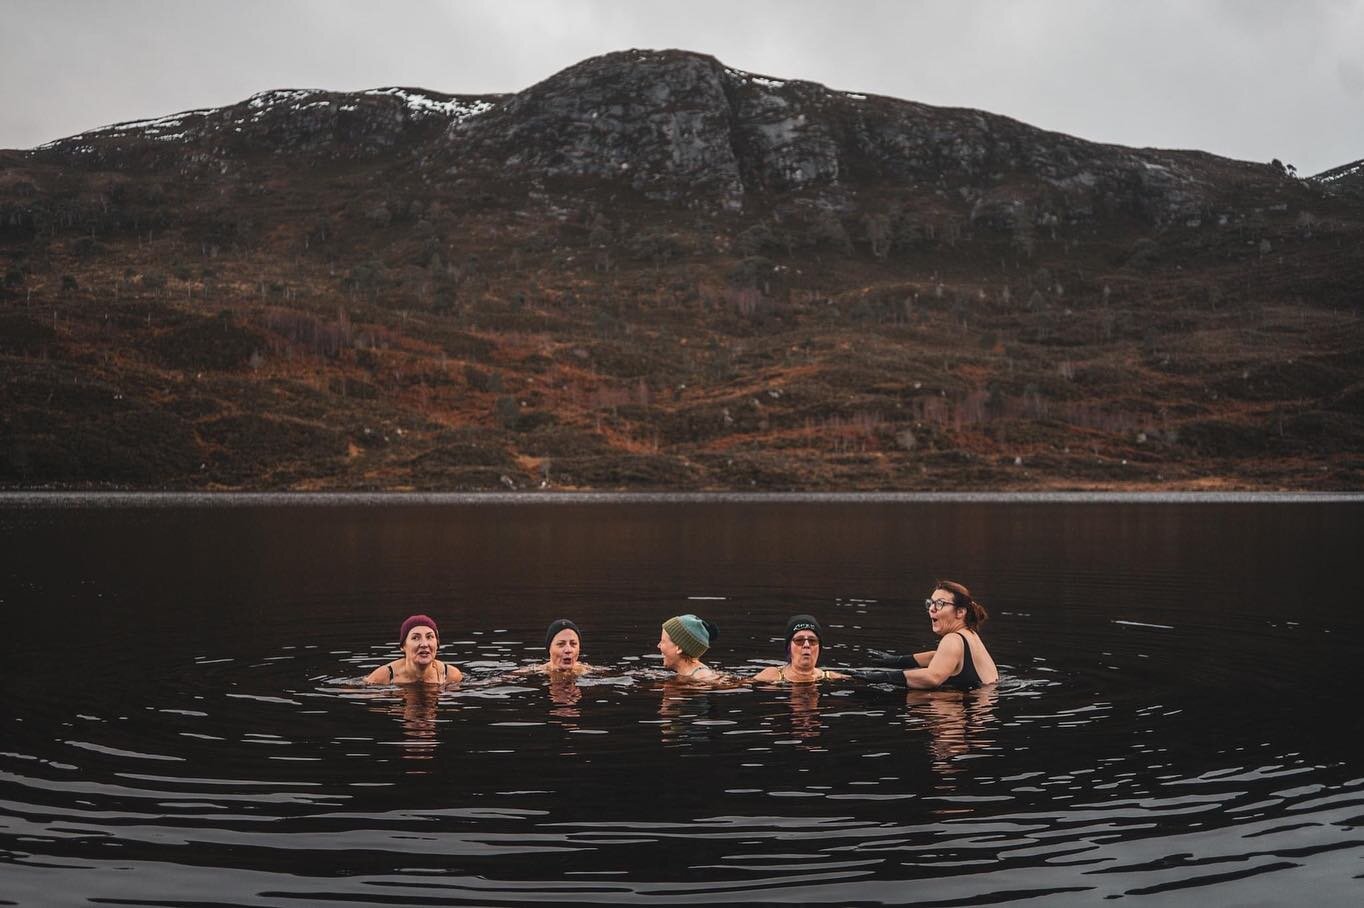 Yoga Folk X Wild-Ness ~ Yoga + Wild Swimming

Saturday, November 25, 2023
10:00 AM  12:30 PM
Balnain Hall
Balnain IV63 6TJ

Join @wildnessretreat + I for another morning of yoga and cold-water swimming.

This is our 3rd workshop of the year and our c